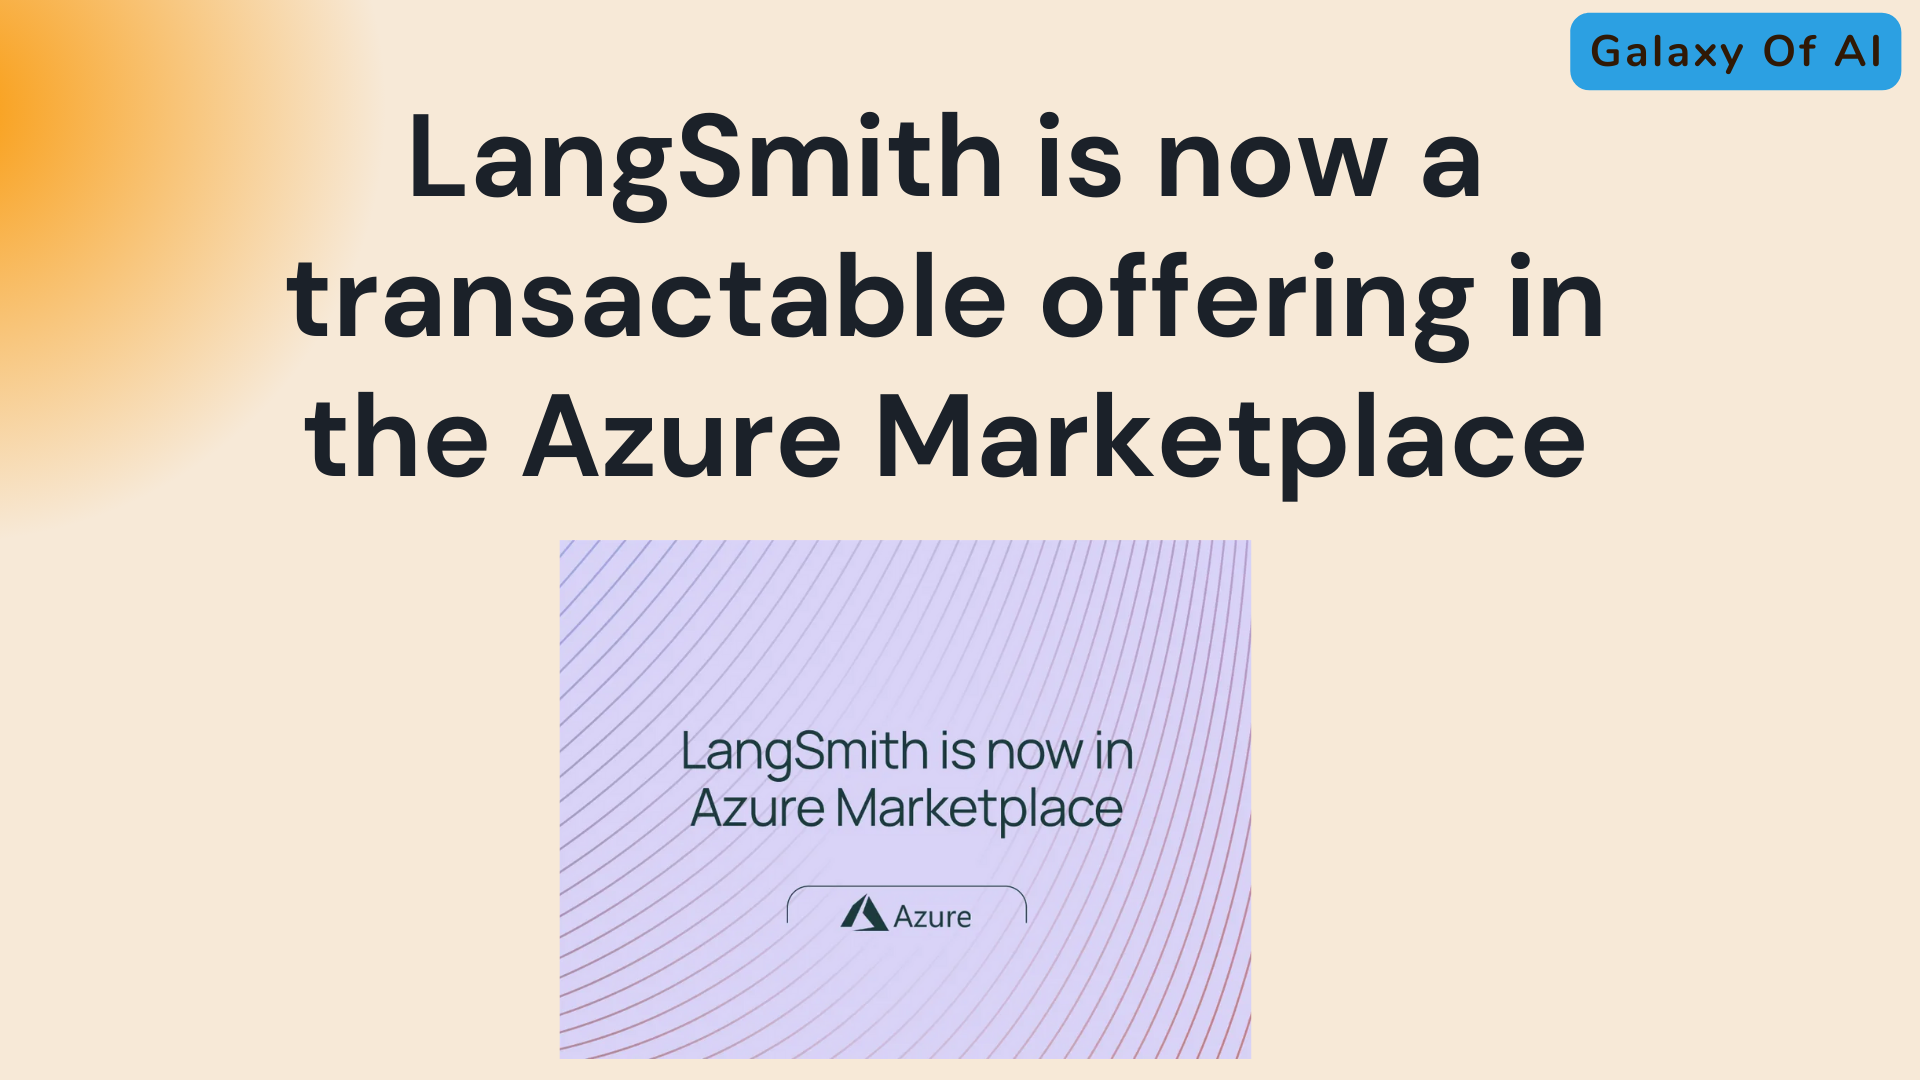 LangSmith is now a transactable offering in the Azure Marketplace